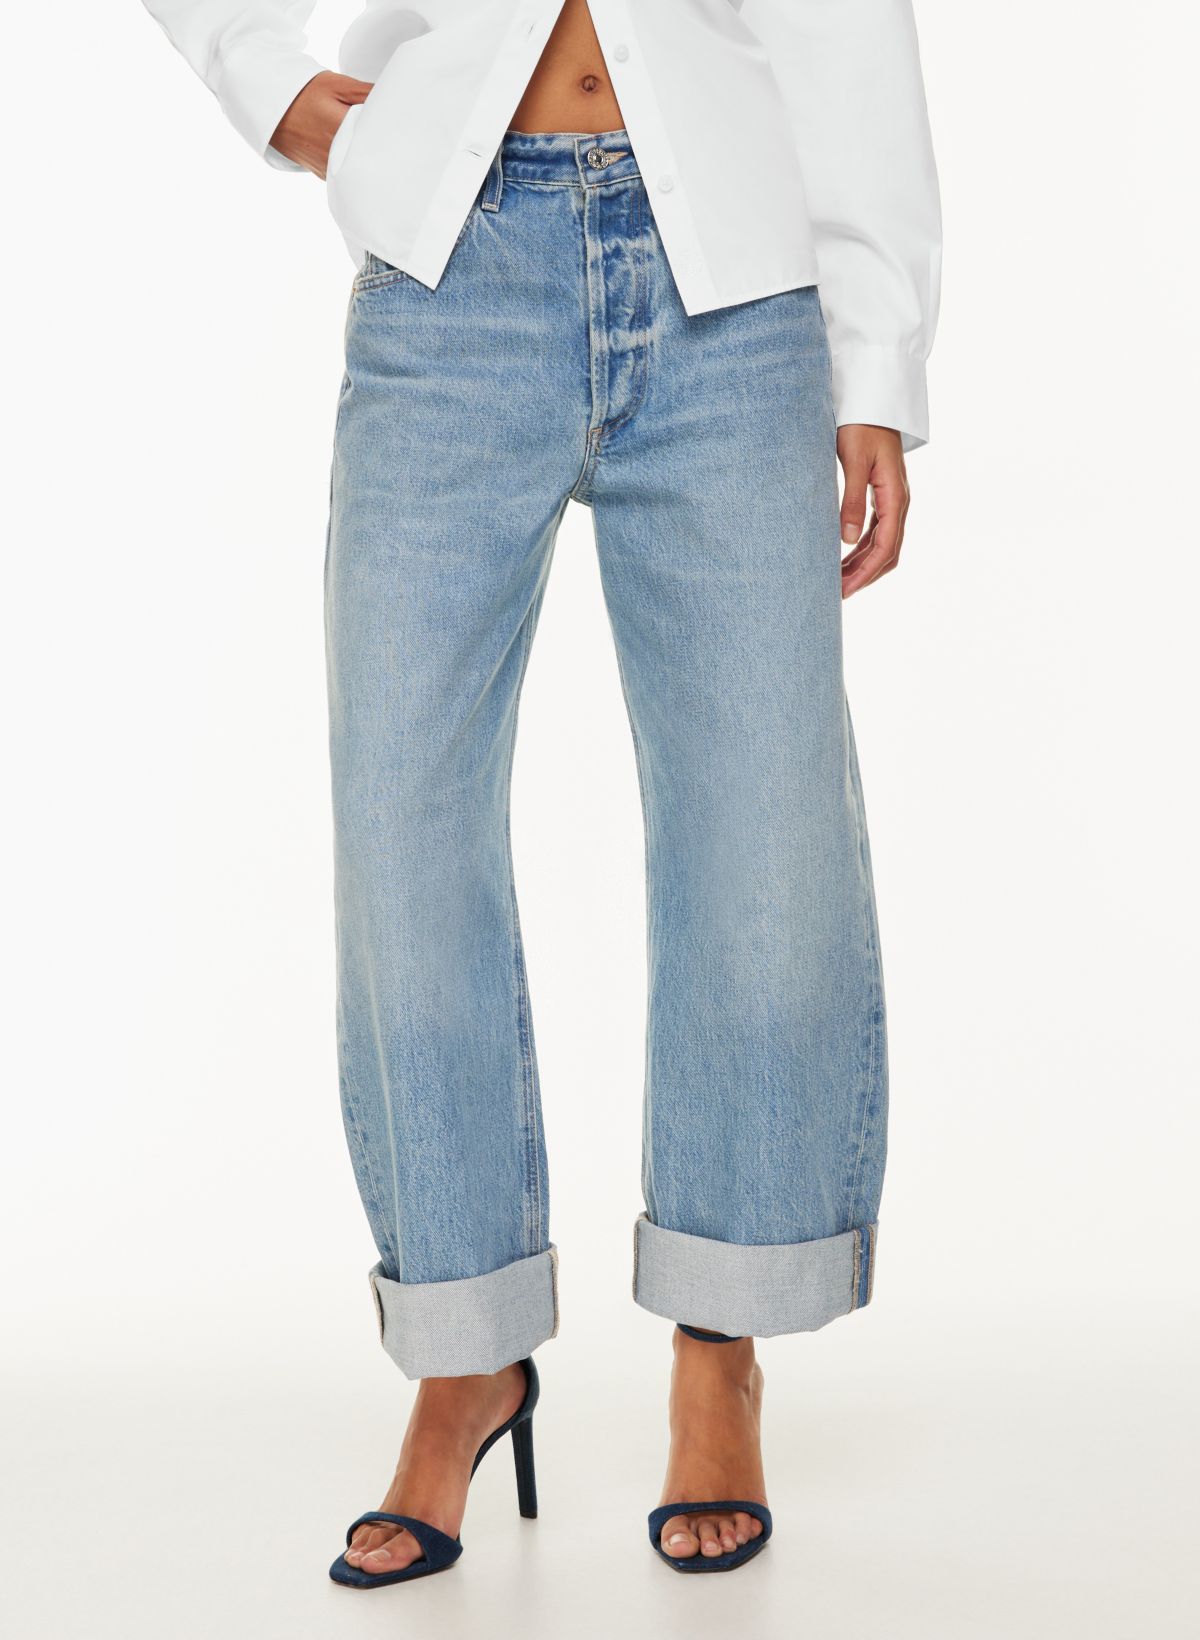 Urskive Bedøvelsesmiddel Tolkning Citizens of Humanity AYLA BAGGY CUFFED JEAN | Aritzia US